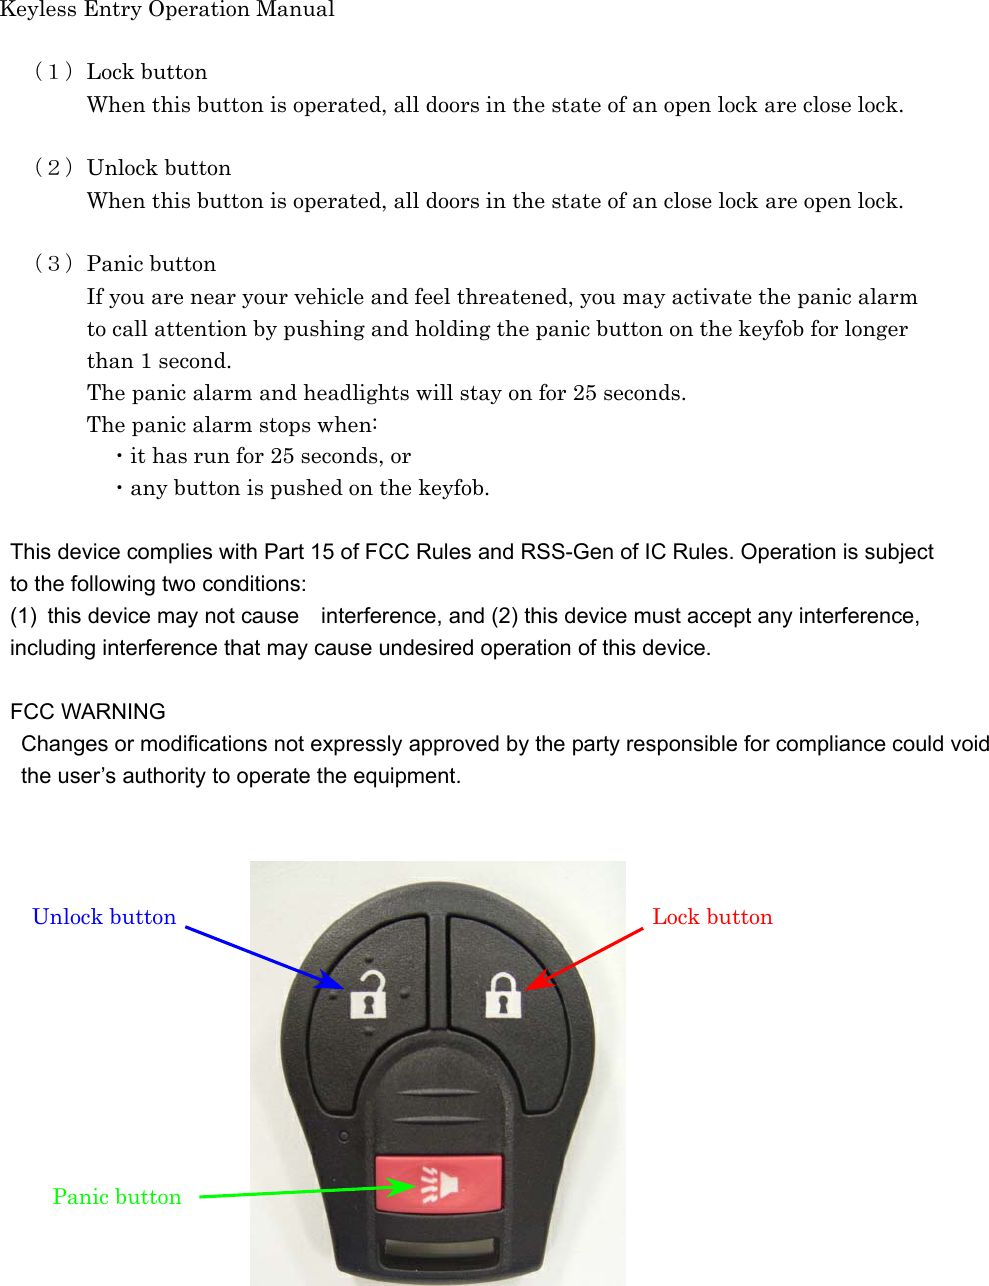 Keyless Entry Operation Manual   （１）Lock button     When this button is operated, all doors in the state of an open lock are close lock.    （２）Unlock button     When this button is operated, all doors in the state of an close lock are open lock.      （３）Panic button     If you are near your vehicle and feel threatened, you may activate the panic alarm         to call attention by pushing and holding the panic button on the keyfob for longer         than 1 second.                 The panic alarm and headlights will stay on for 25 seconds.     The panic alarm stops when:      ・it has run for 25 seconds, or        ・any button is pushed on the keyfob.  This device complies with Part 15 of FCC Rules and RSS-Gen of IC Rules. Operation is subject   to the following two conditions: (1)  this device may not cause interference, and (2) this device must accept any interference,   including interference that may cause undesired operation of this device.  FCC WARNING Changes or modifications not expressly approved by the party responsible for compliance could void   the user’s authority to operate the equipment.                Unlock button  Lock button Panic button   